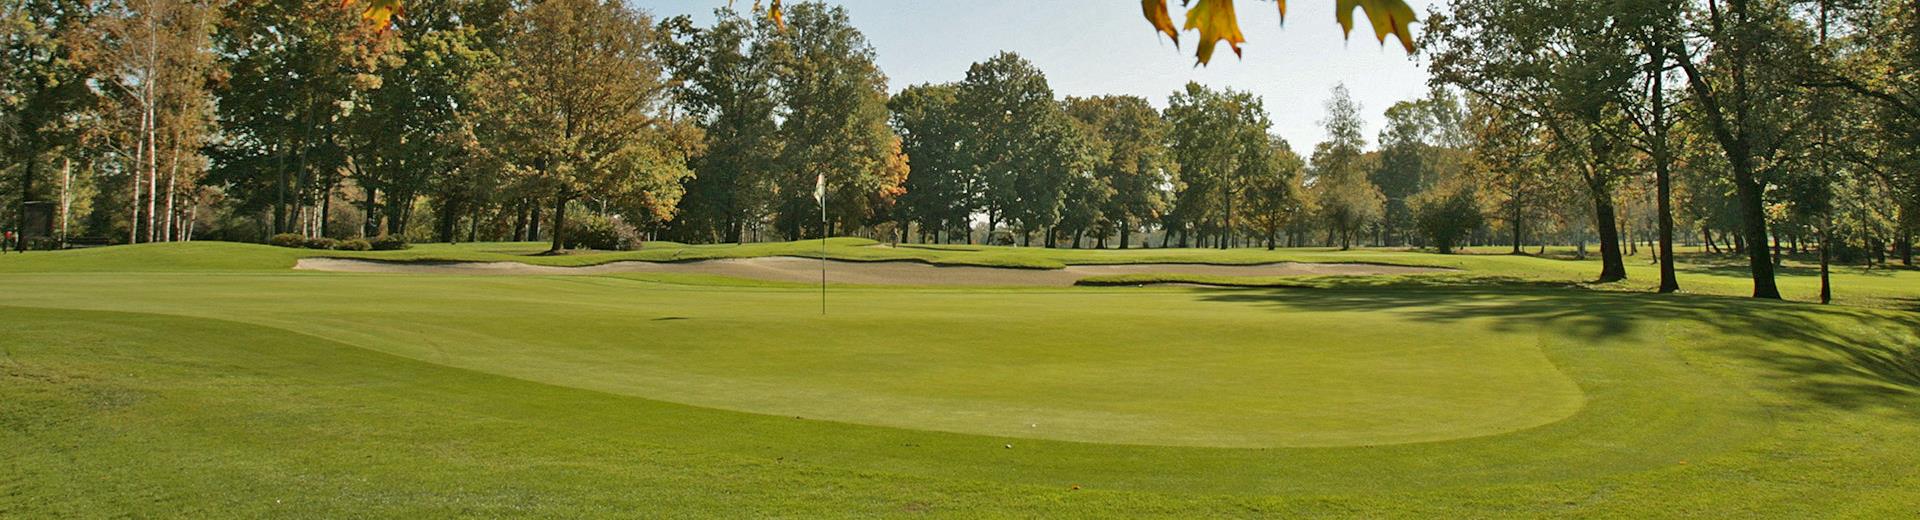 At the Best Western Plus Hotel Le Rondini you can get discounts on green fees for Torino La Mandria Golf Clubs, Royal Park I Roveri and many other Golf Clubs of Piedmont. And for the plus-ones, discounts for shopping and SPA.